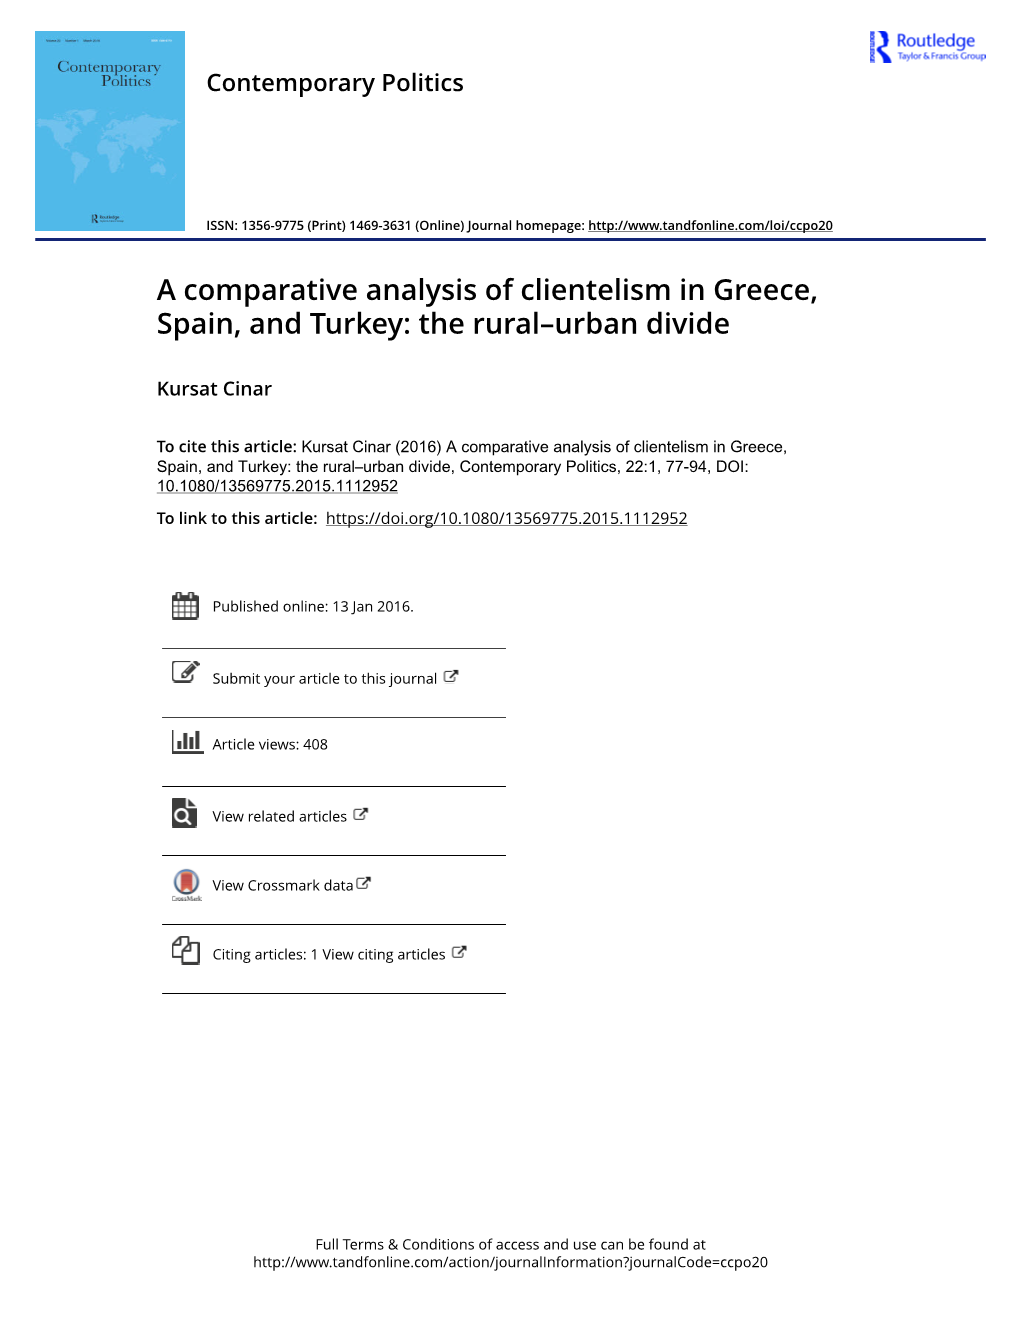 A Comparative Analysis of Clientelism in Greece, Spain, and Turkey: the Rural–Urban Divide